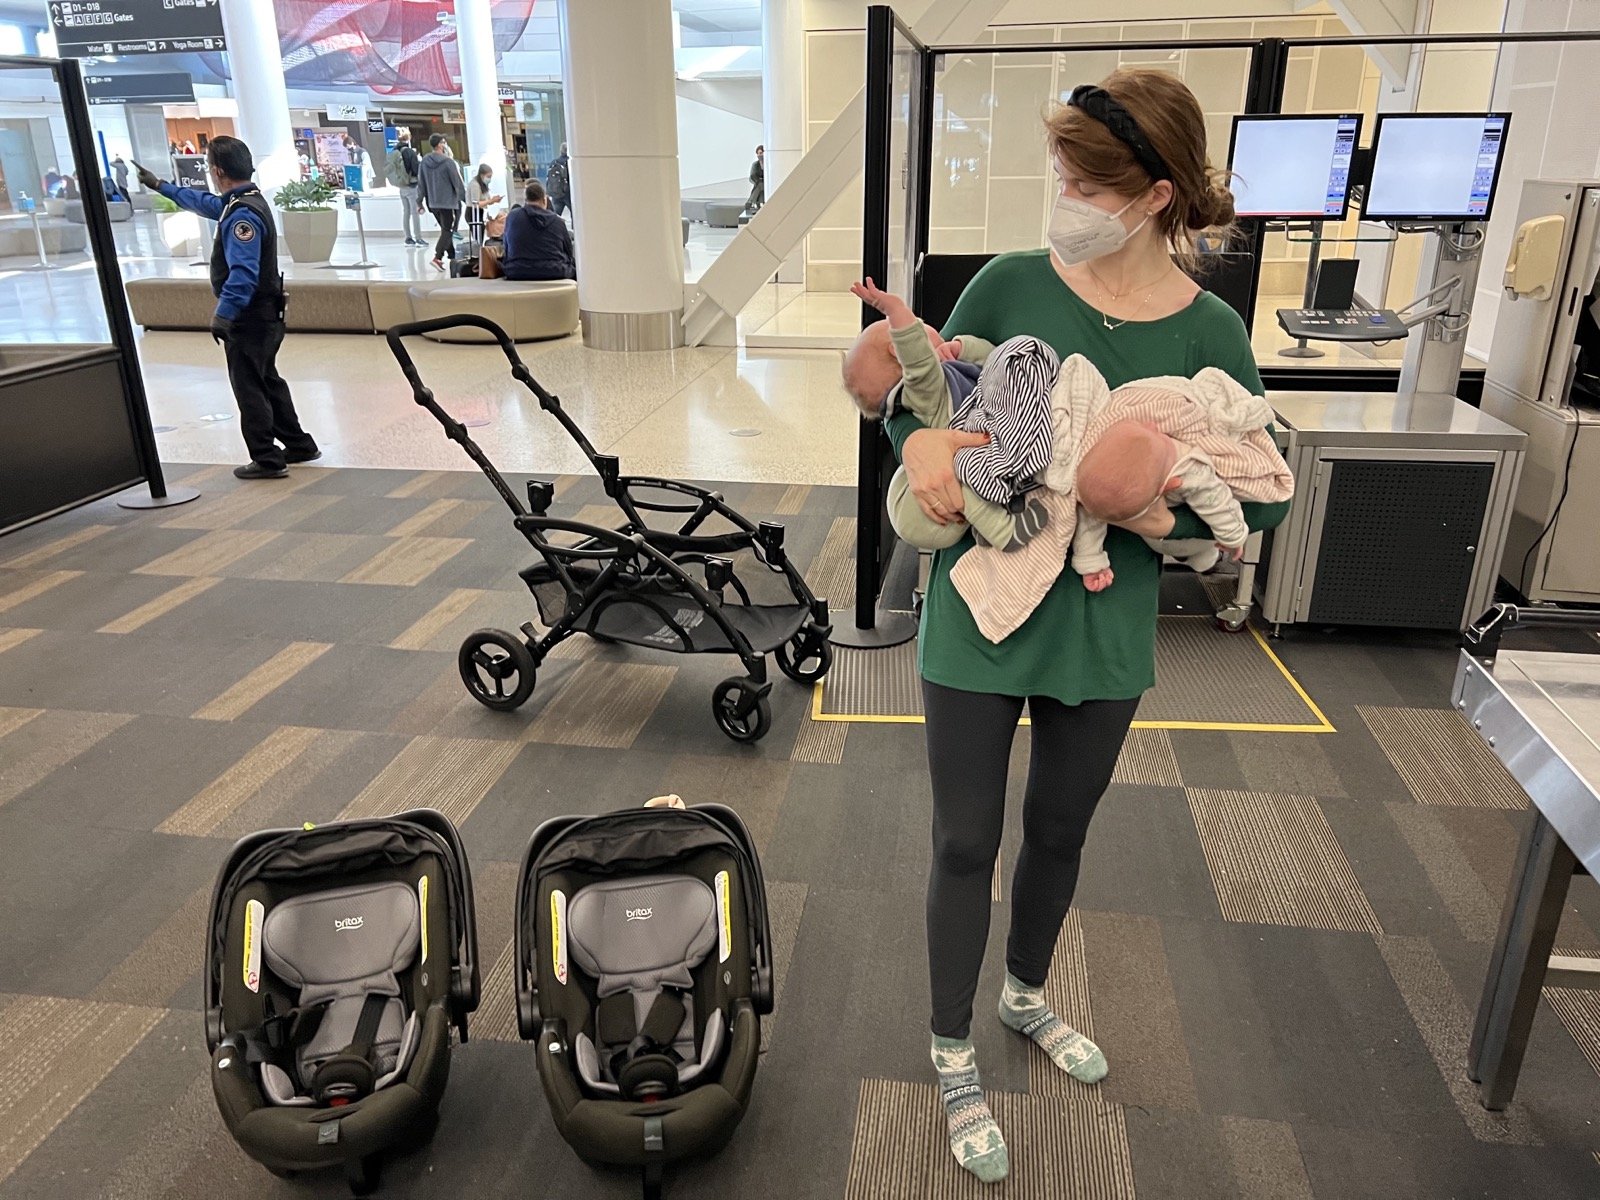 how young can you fly with babies, tips for flying with infant twins babies, lments of style airplane baby tips, britax car seats, contours elite stroller